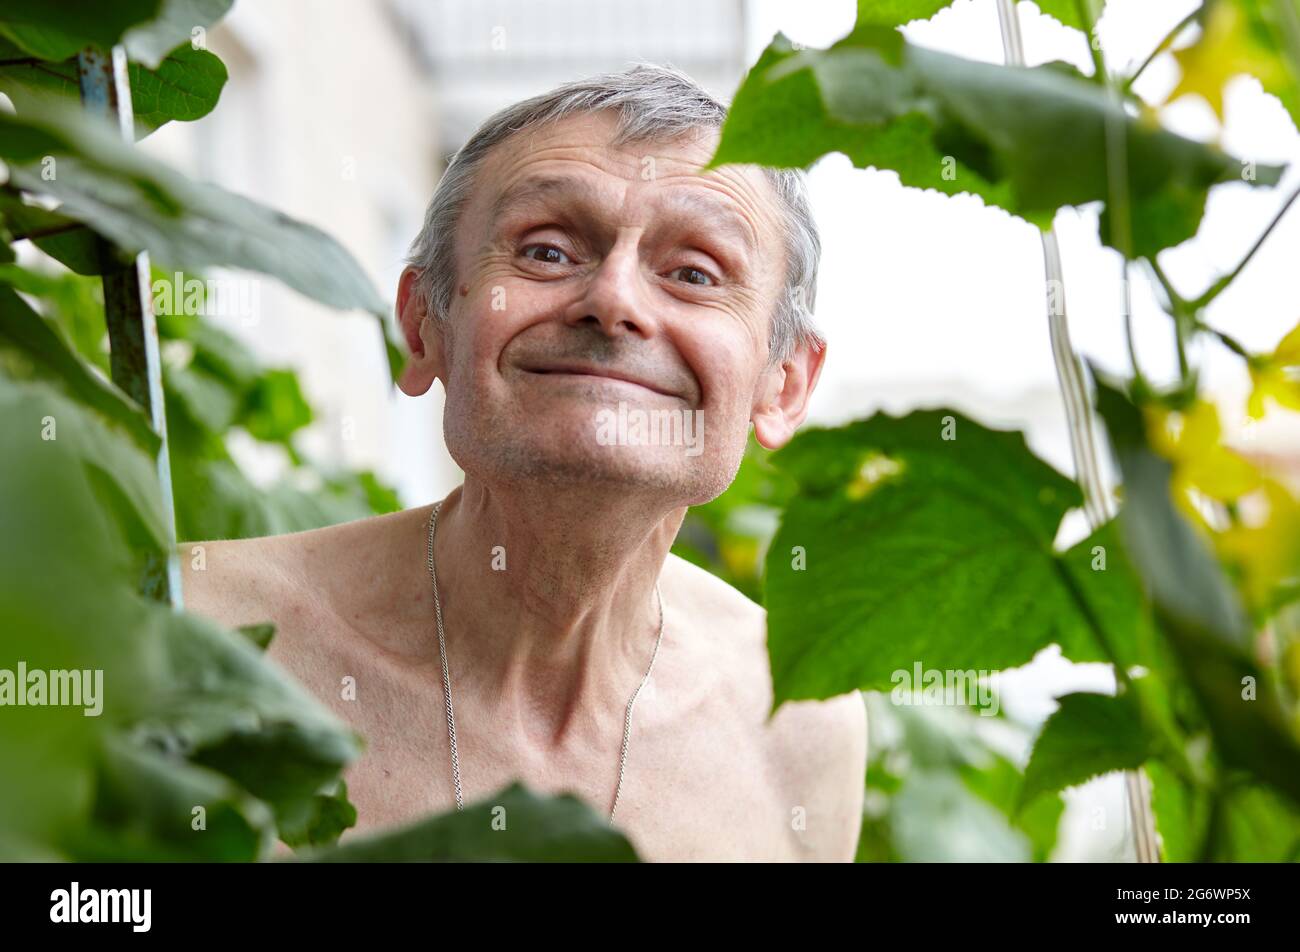 Old man gardening in home greenhouse. Portrait of a happy elderly man Stock Photo